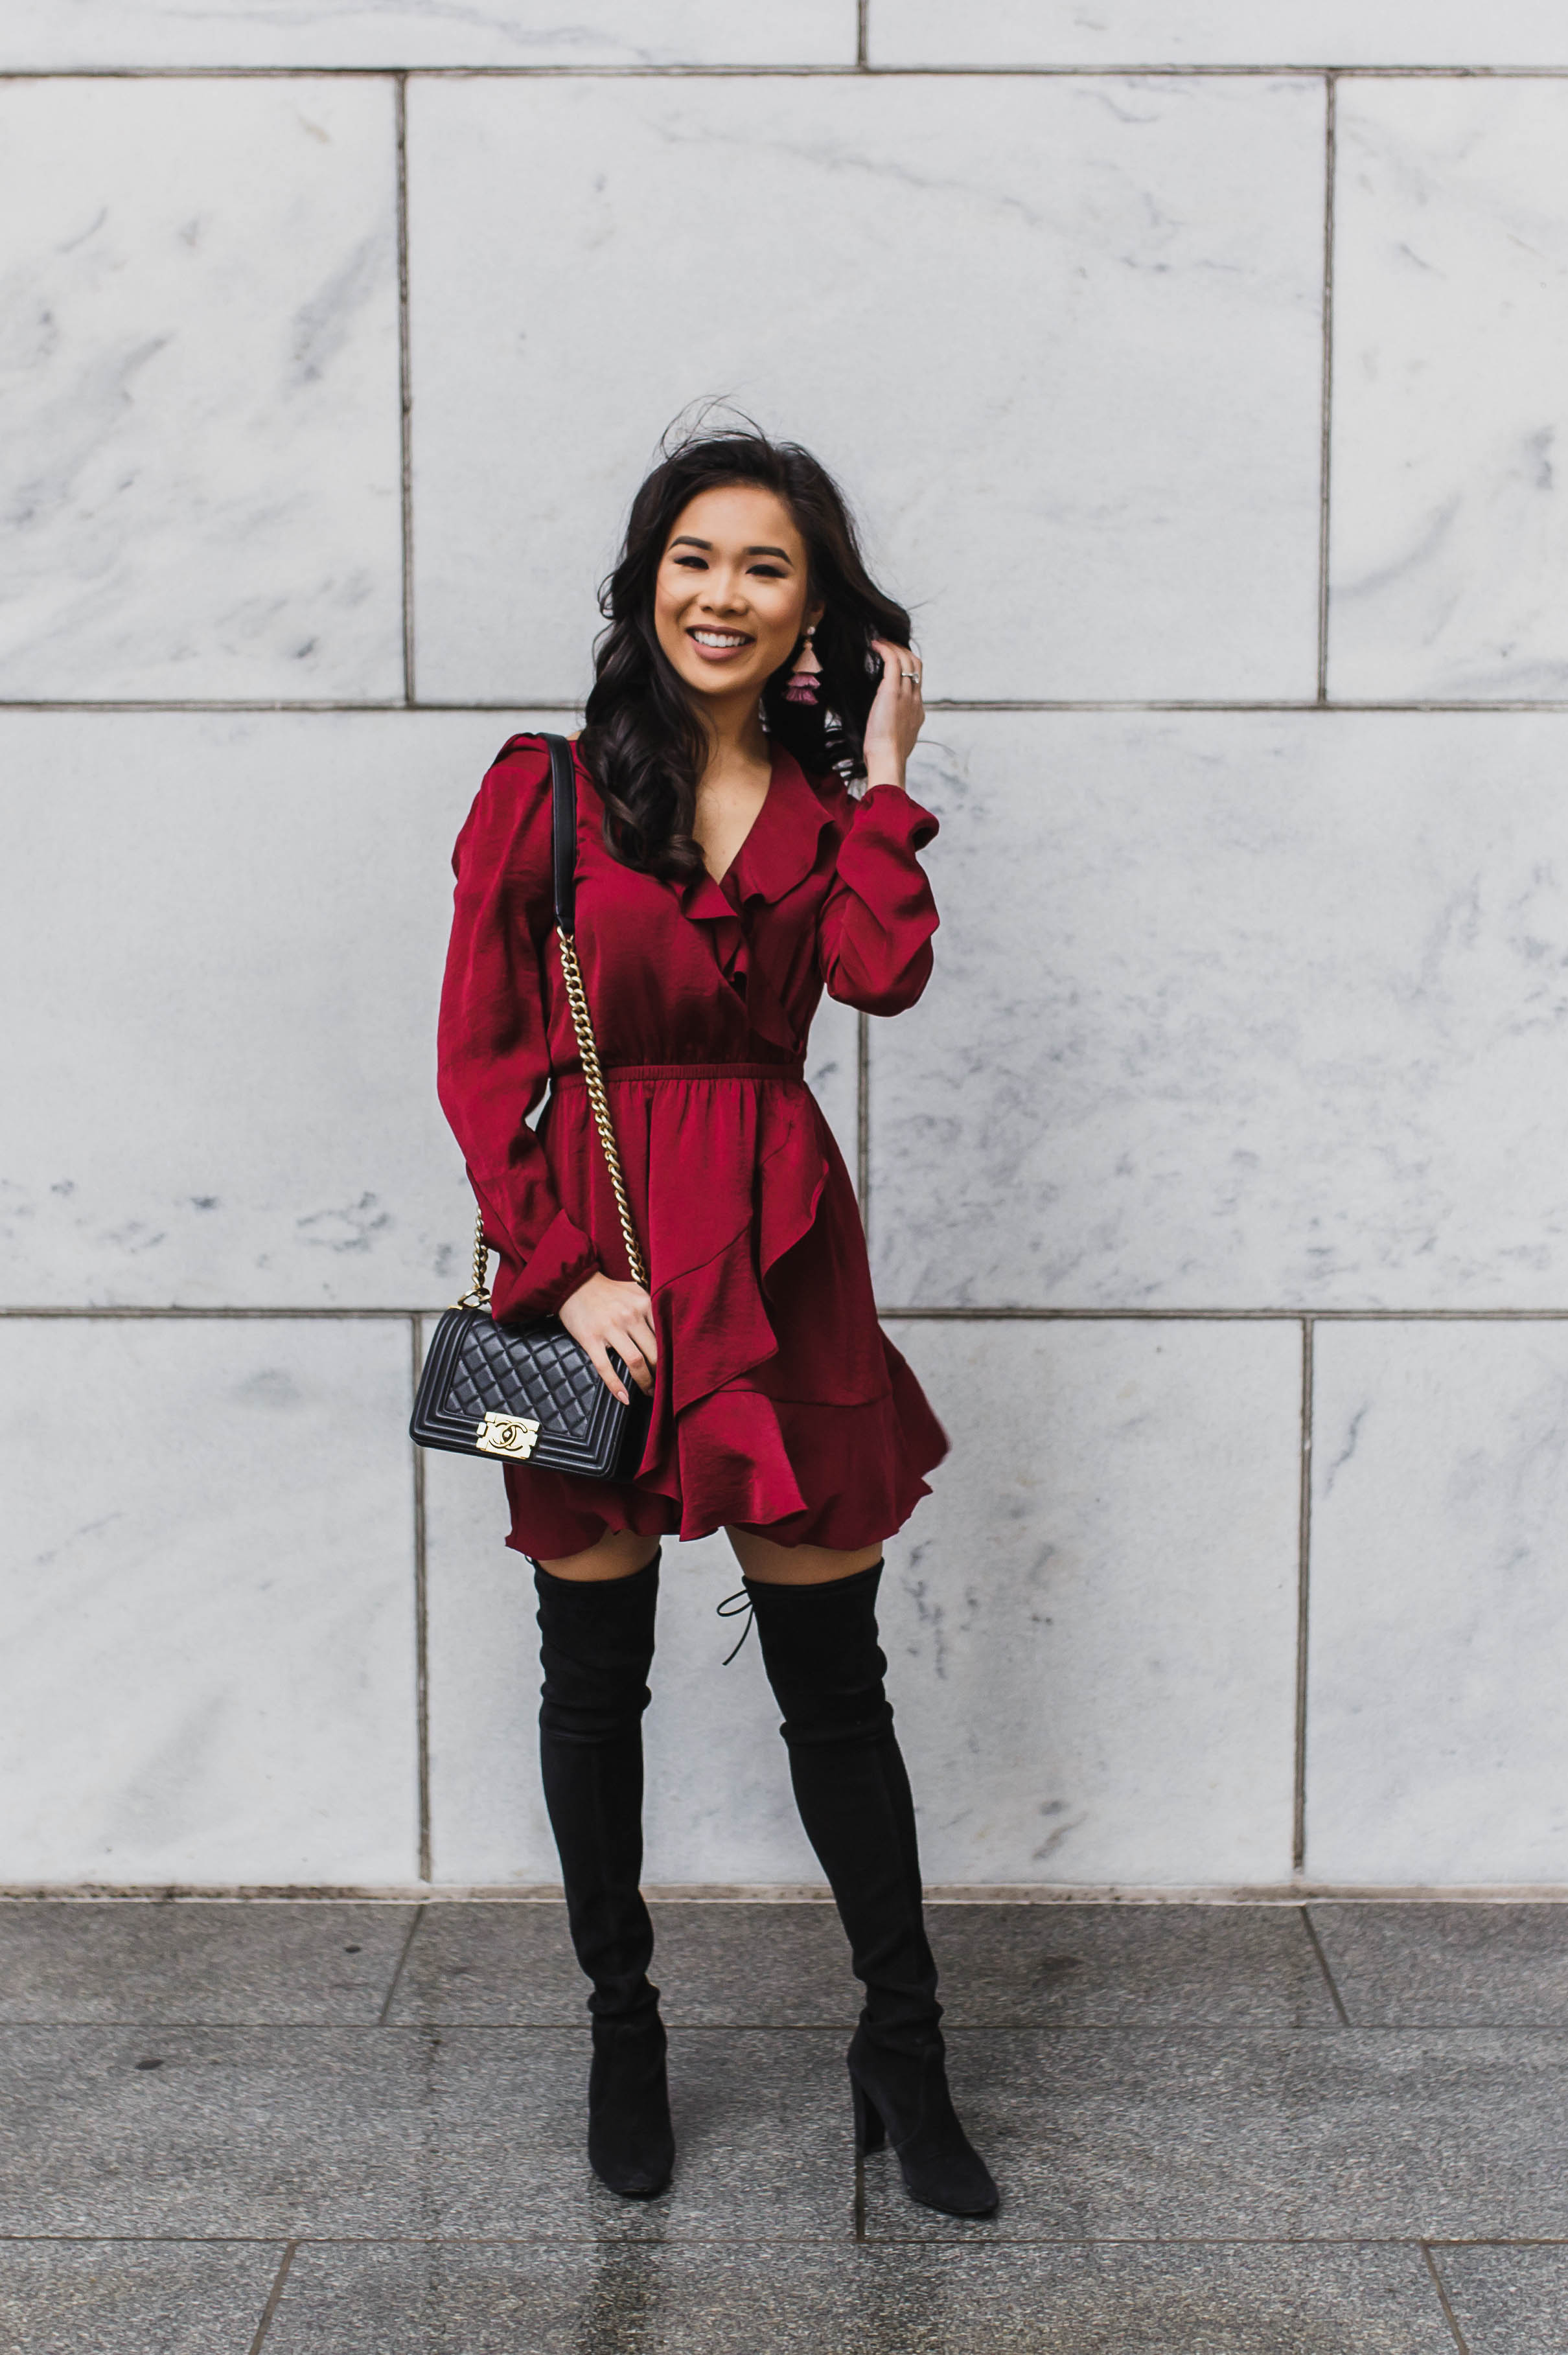 Red Ruffle Dress with over the knee boots and Chanel bag